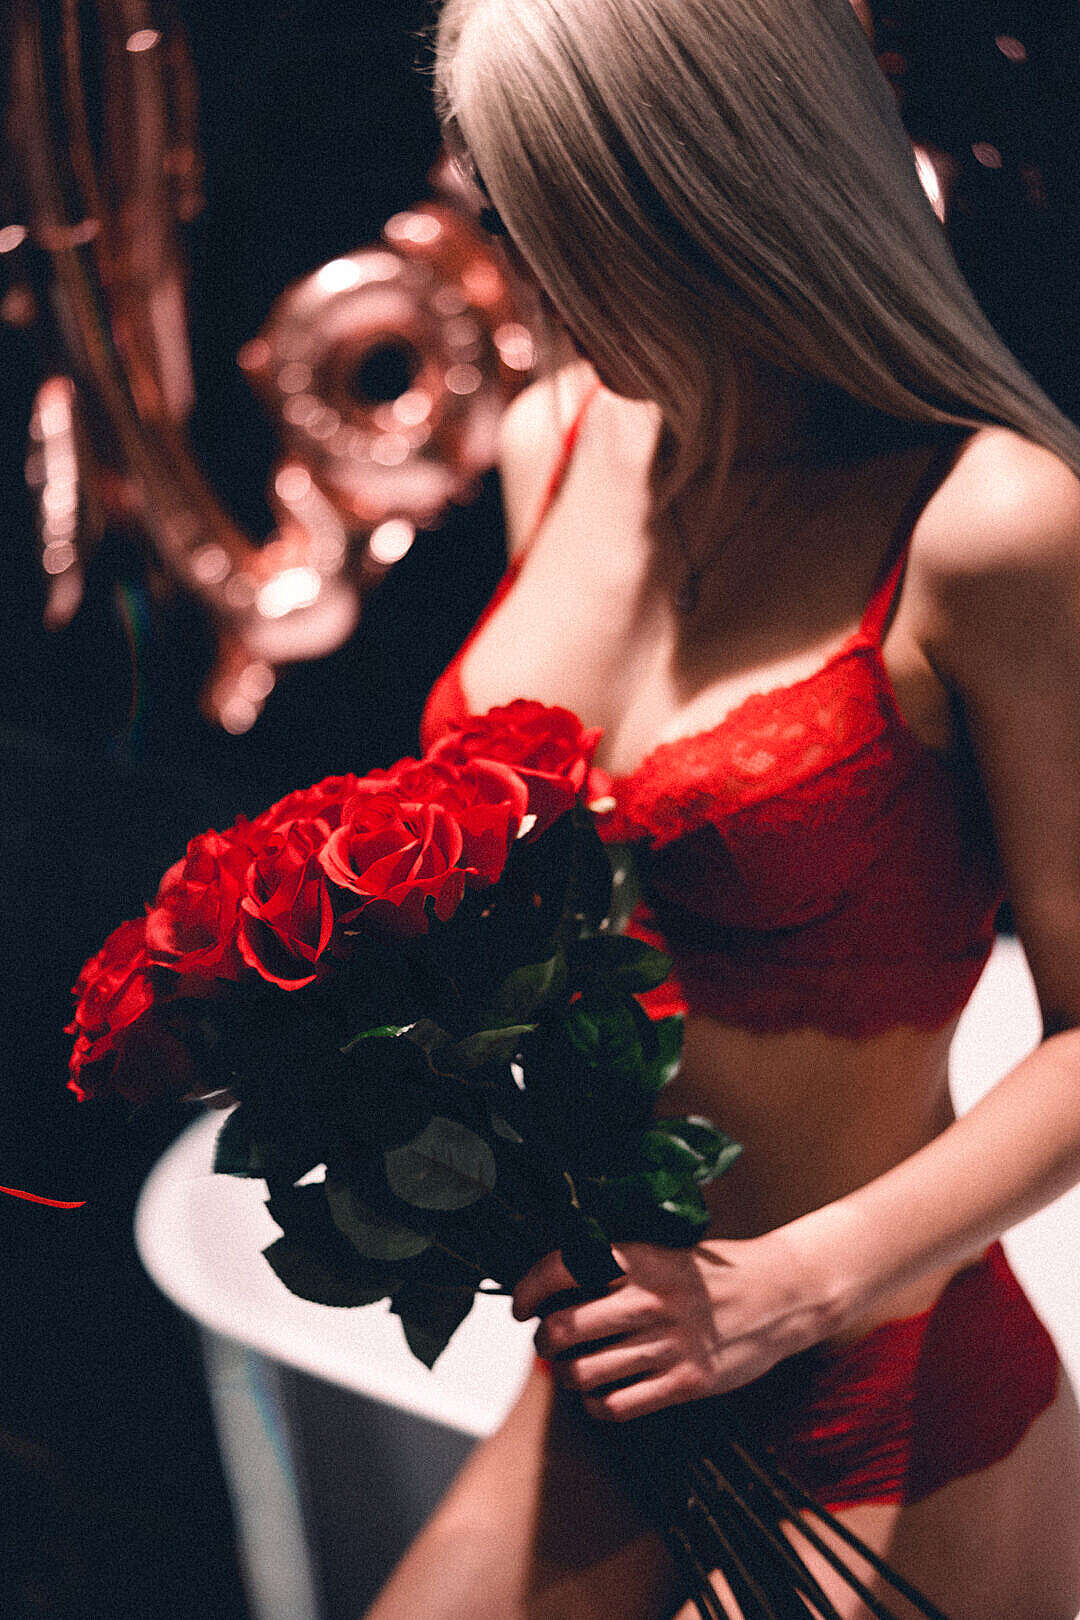 Woman in Red Lace Lingerie Holding a Bouquet of Roses